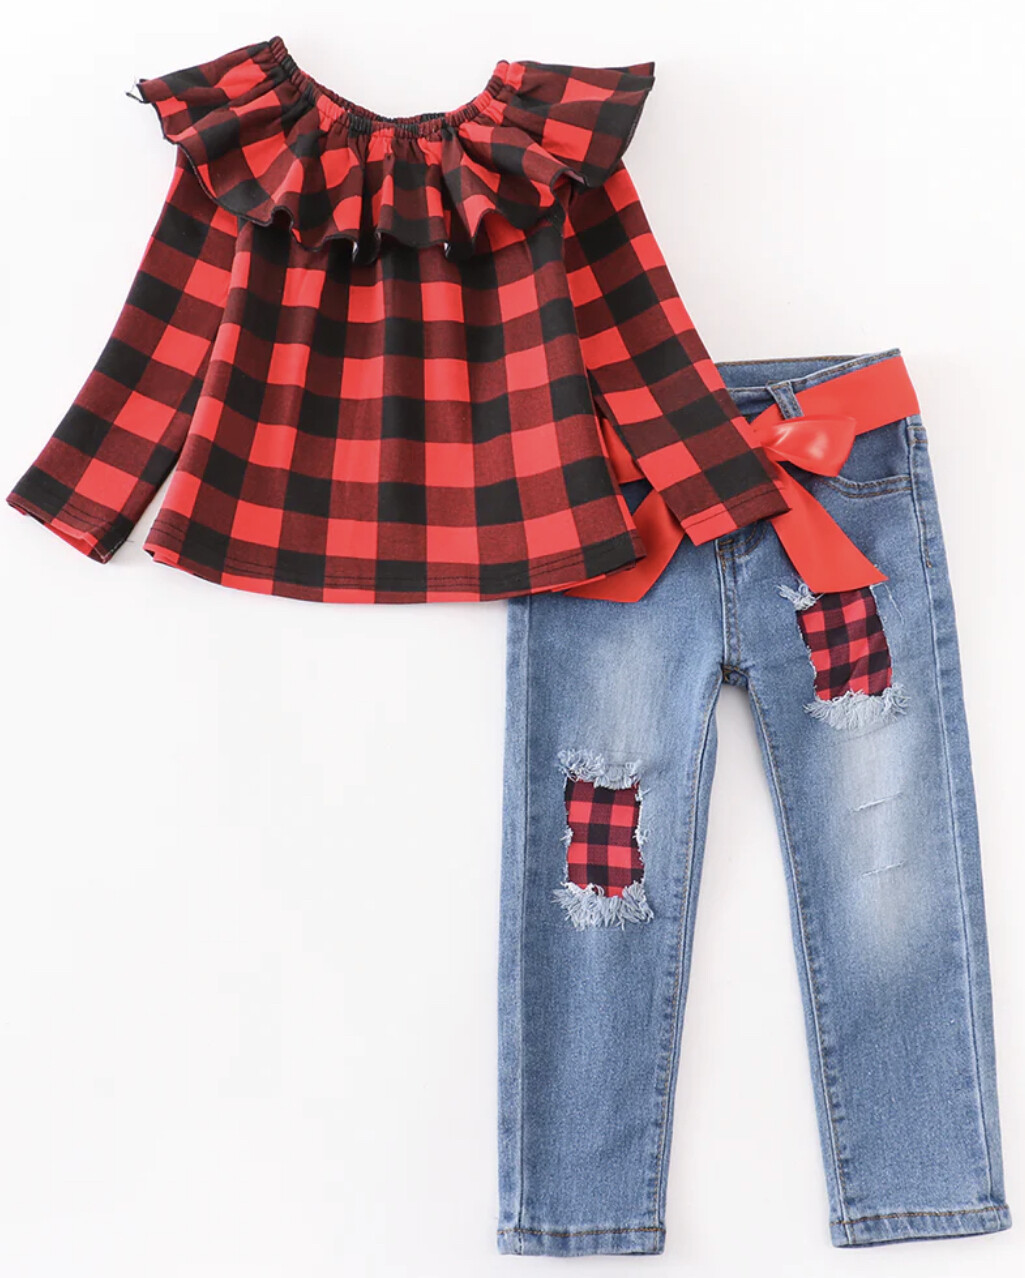 Red and Plaid top and Jeans set